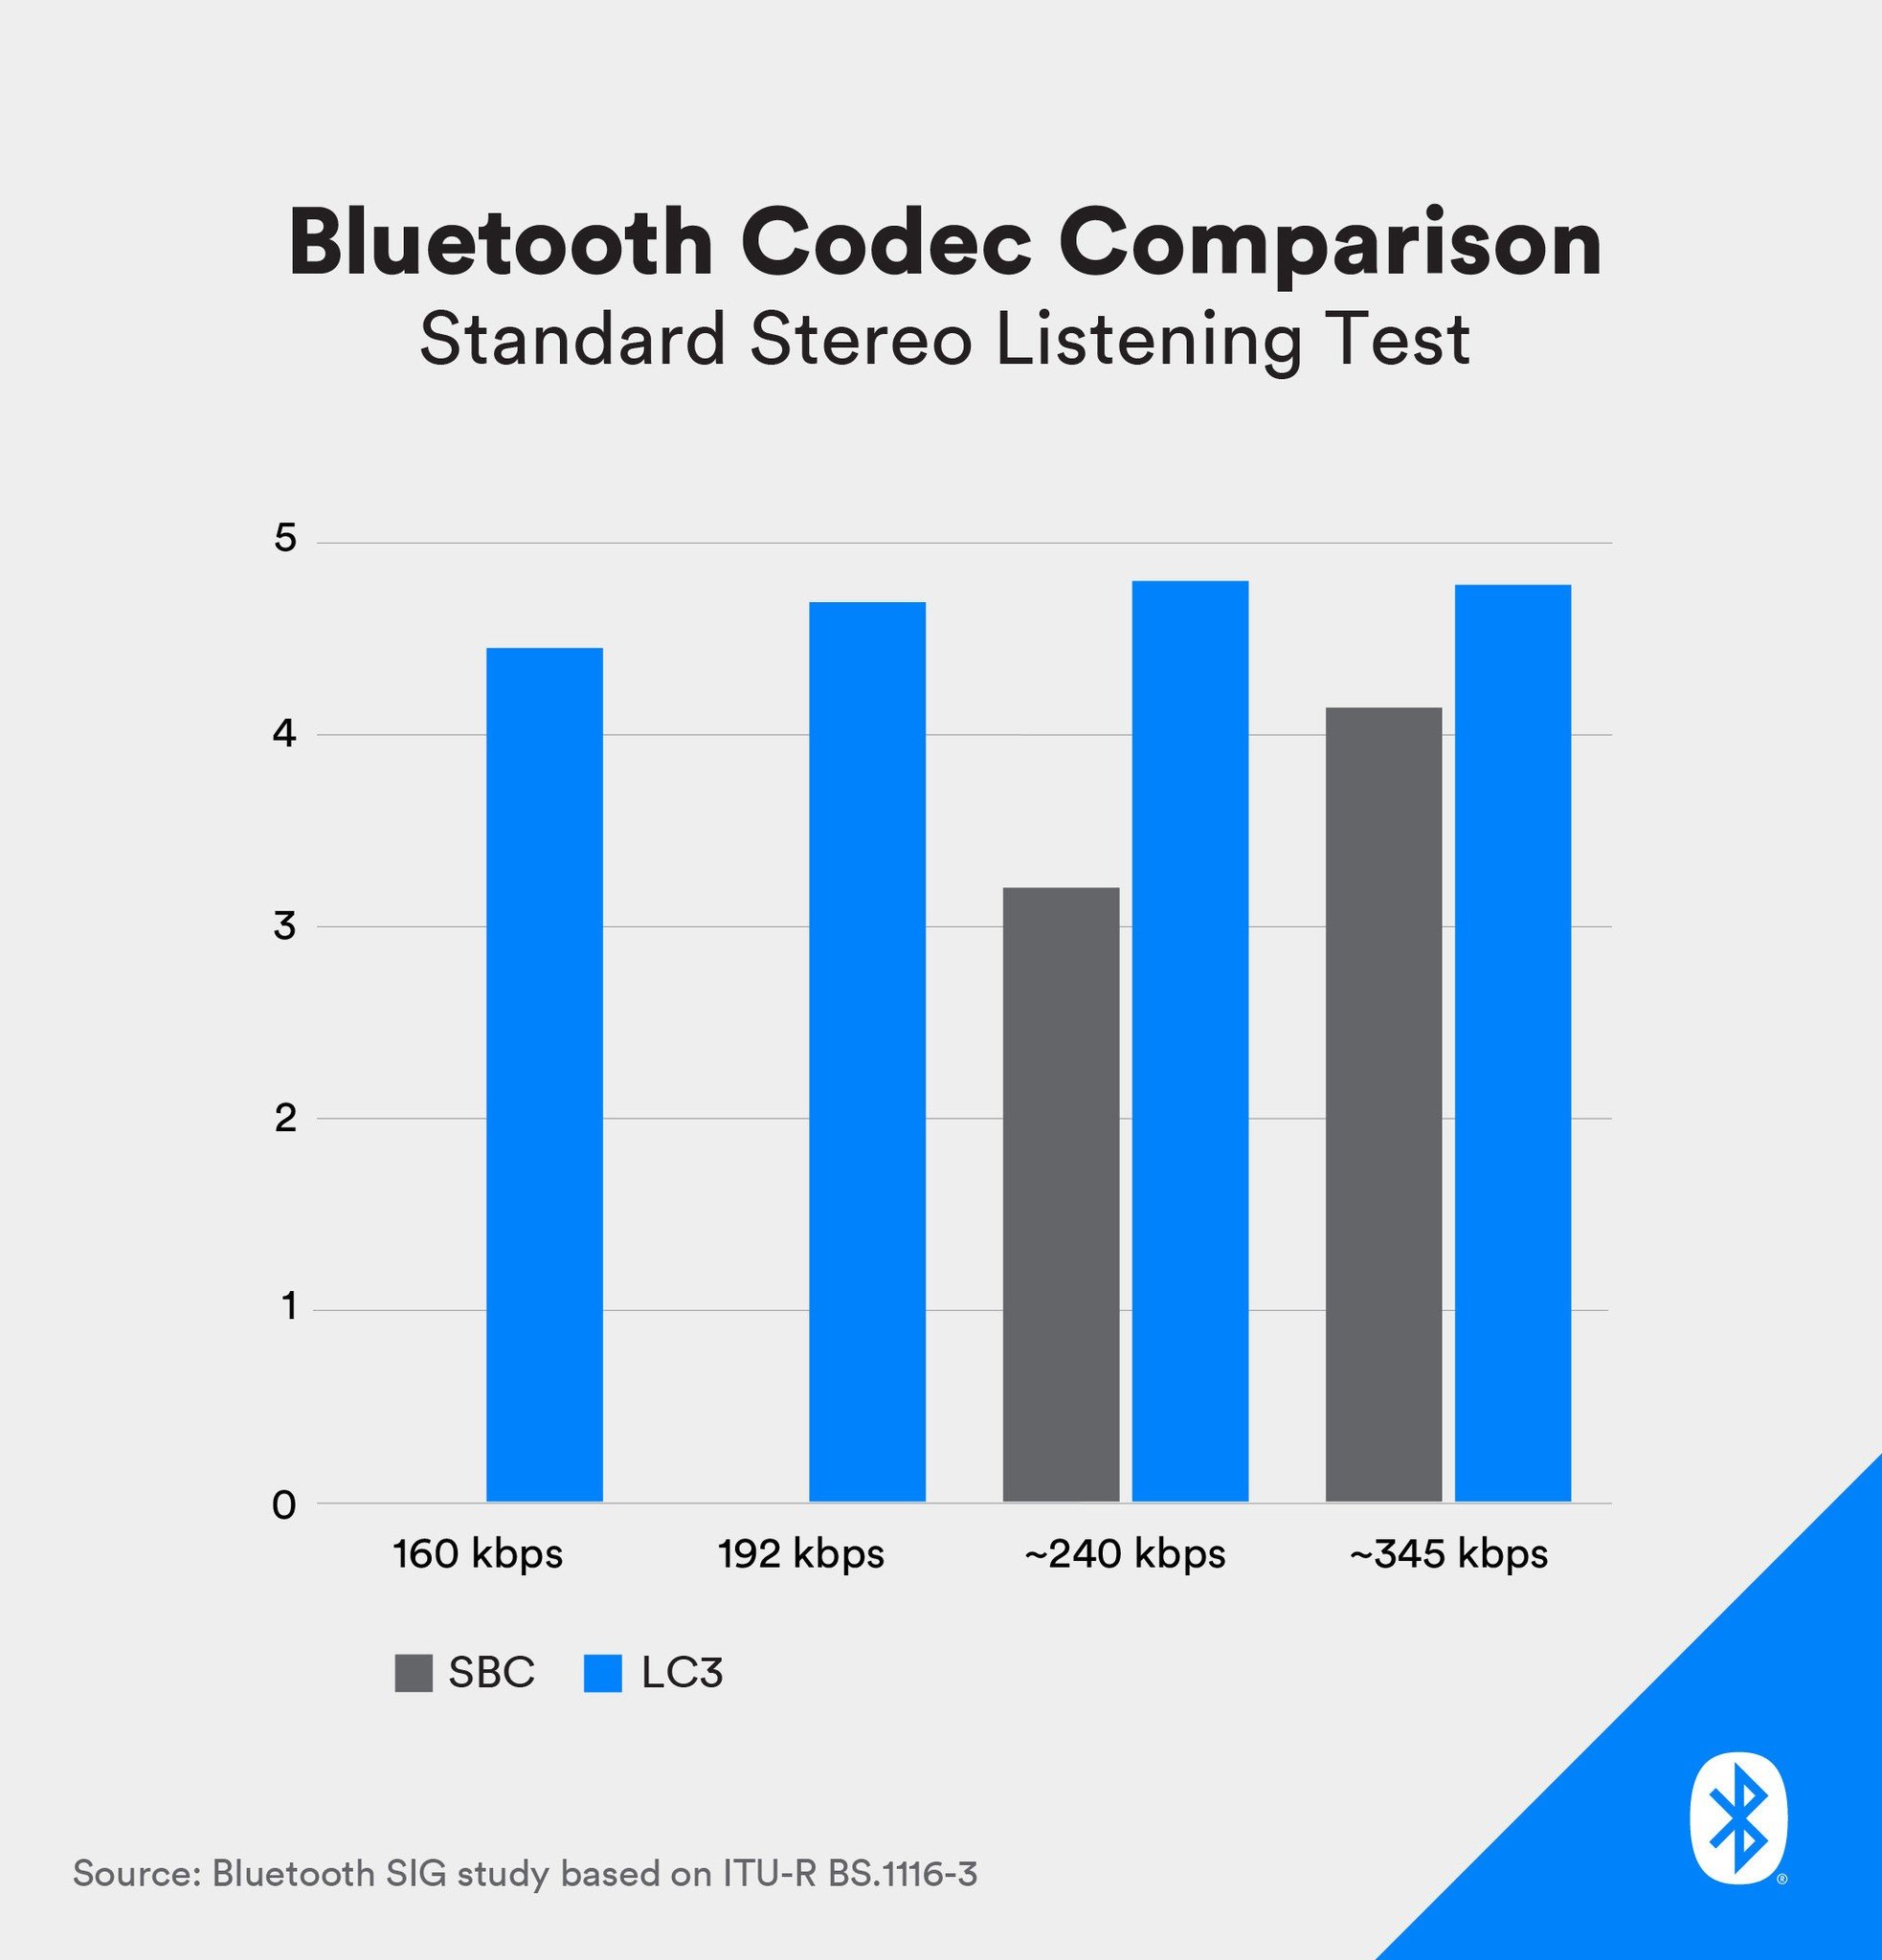 Comparison of LE and Classic Audio on Bluetooth